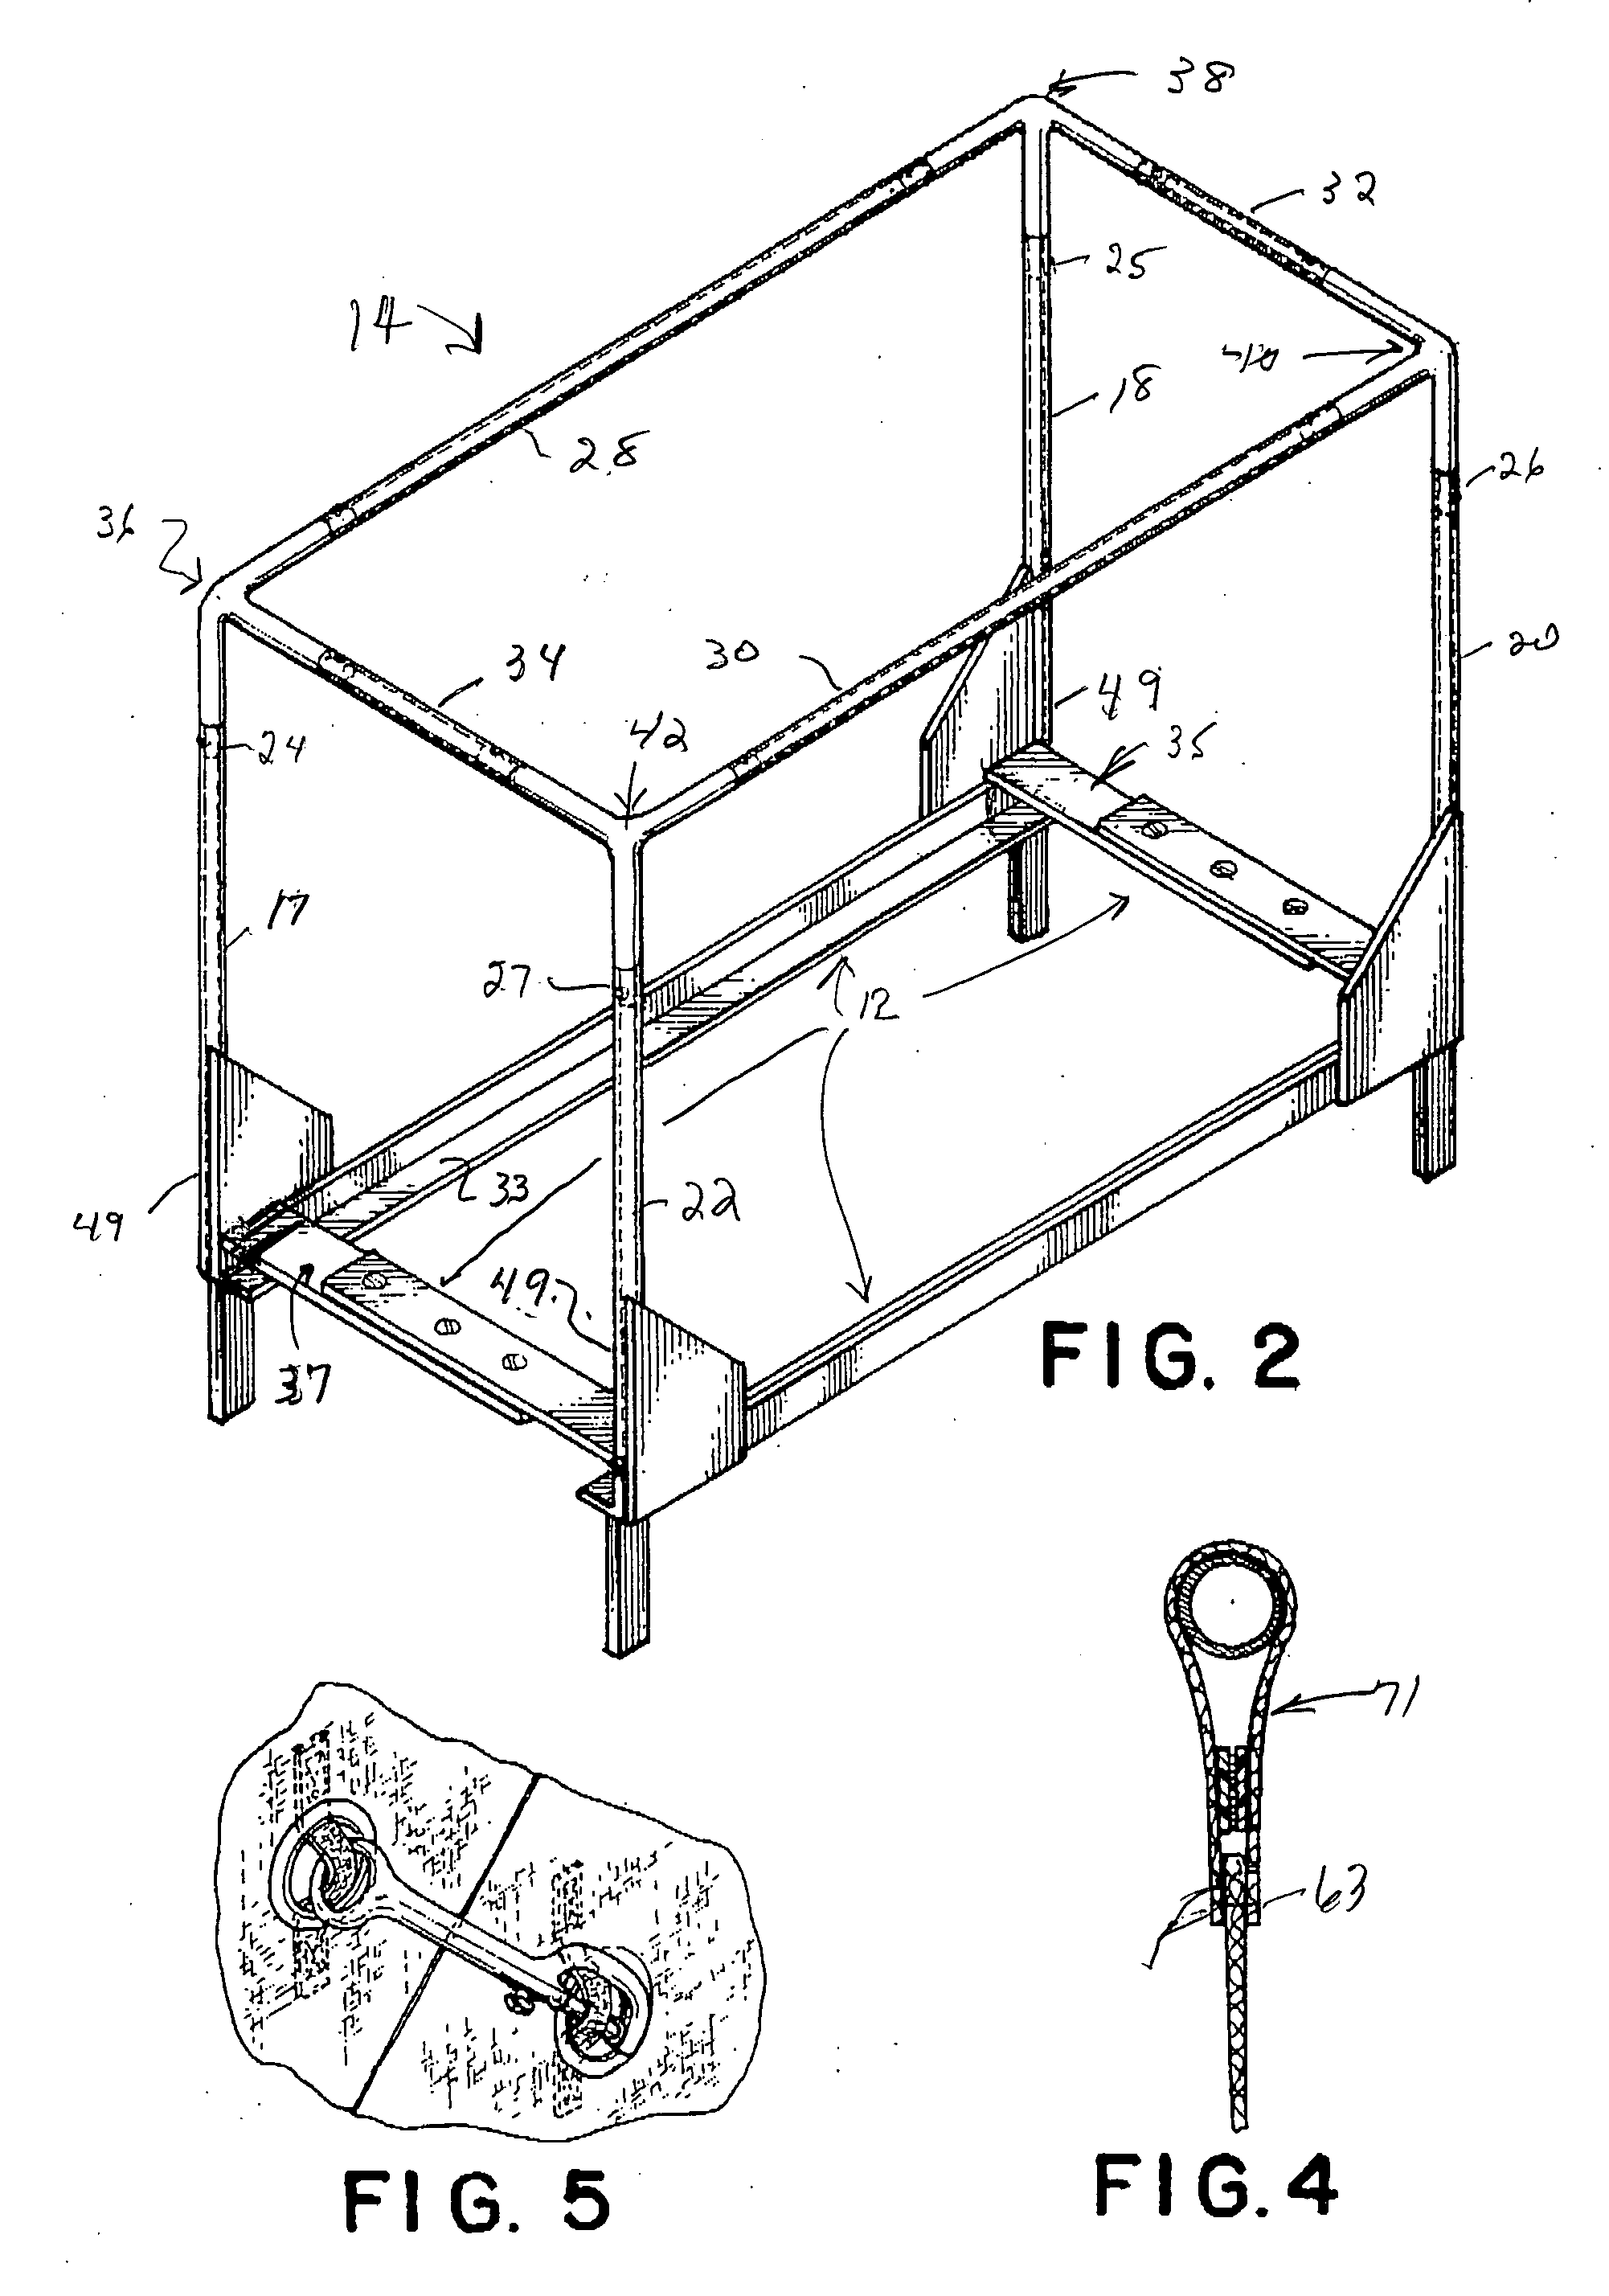 Structure to enclose a safe zone on and above a mattress and its support permitting limited movement only of a bedridden patient in the safe zone